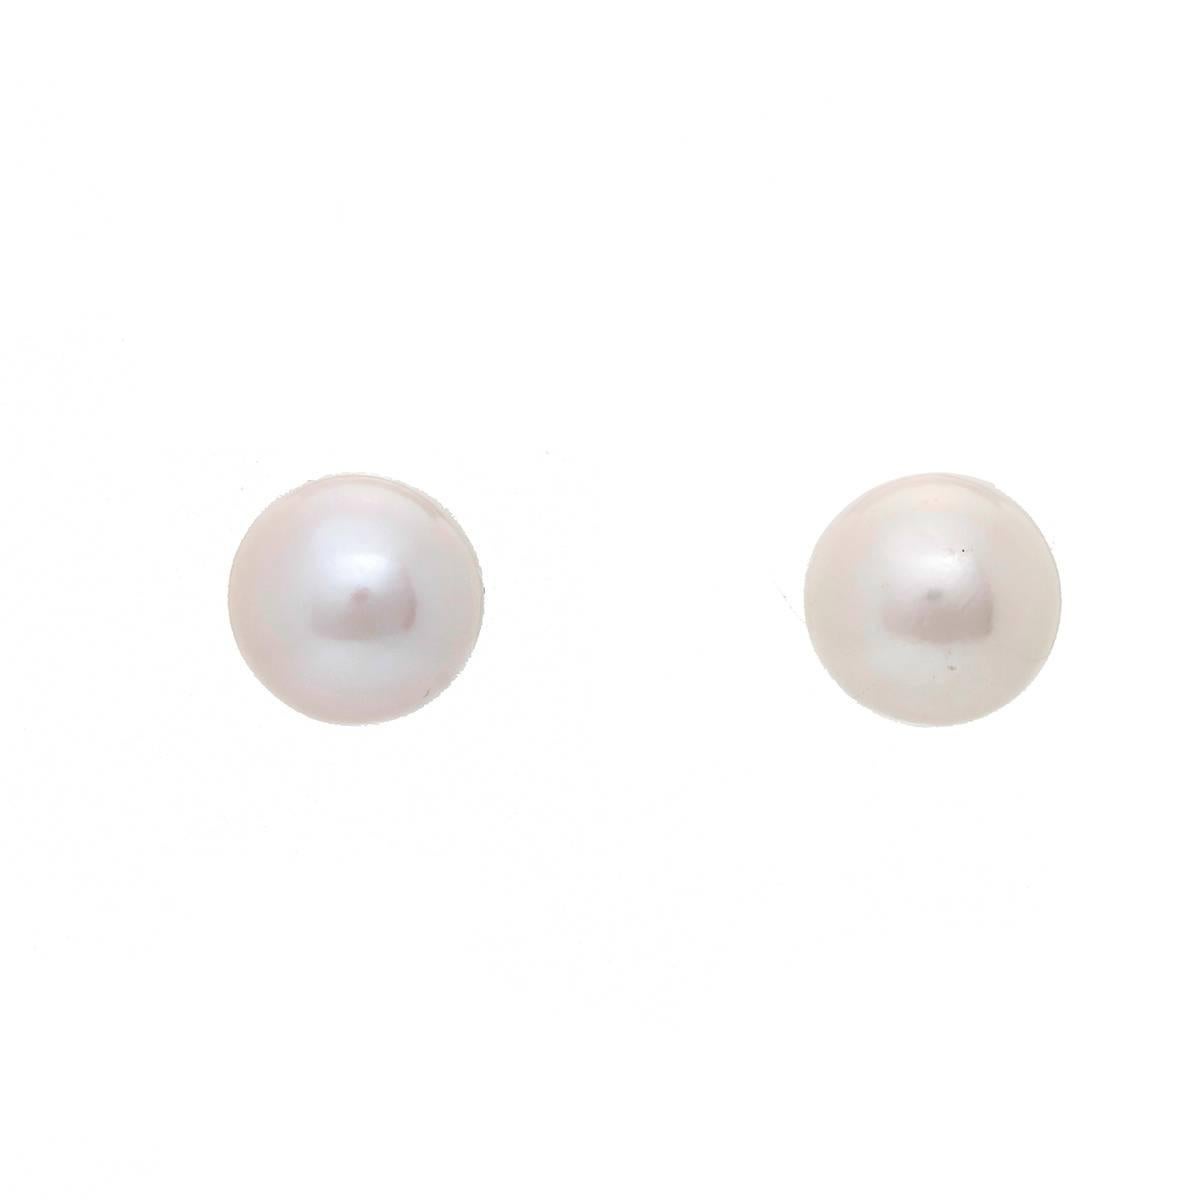 Freshwater Pearl Studs 13.22 mm - . 13.22 mm freshwater pearl studs. Beautiful for everyday wear!